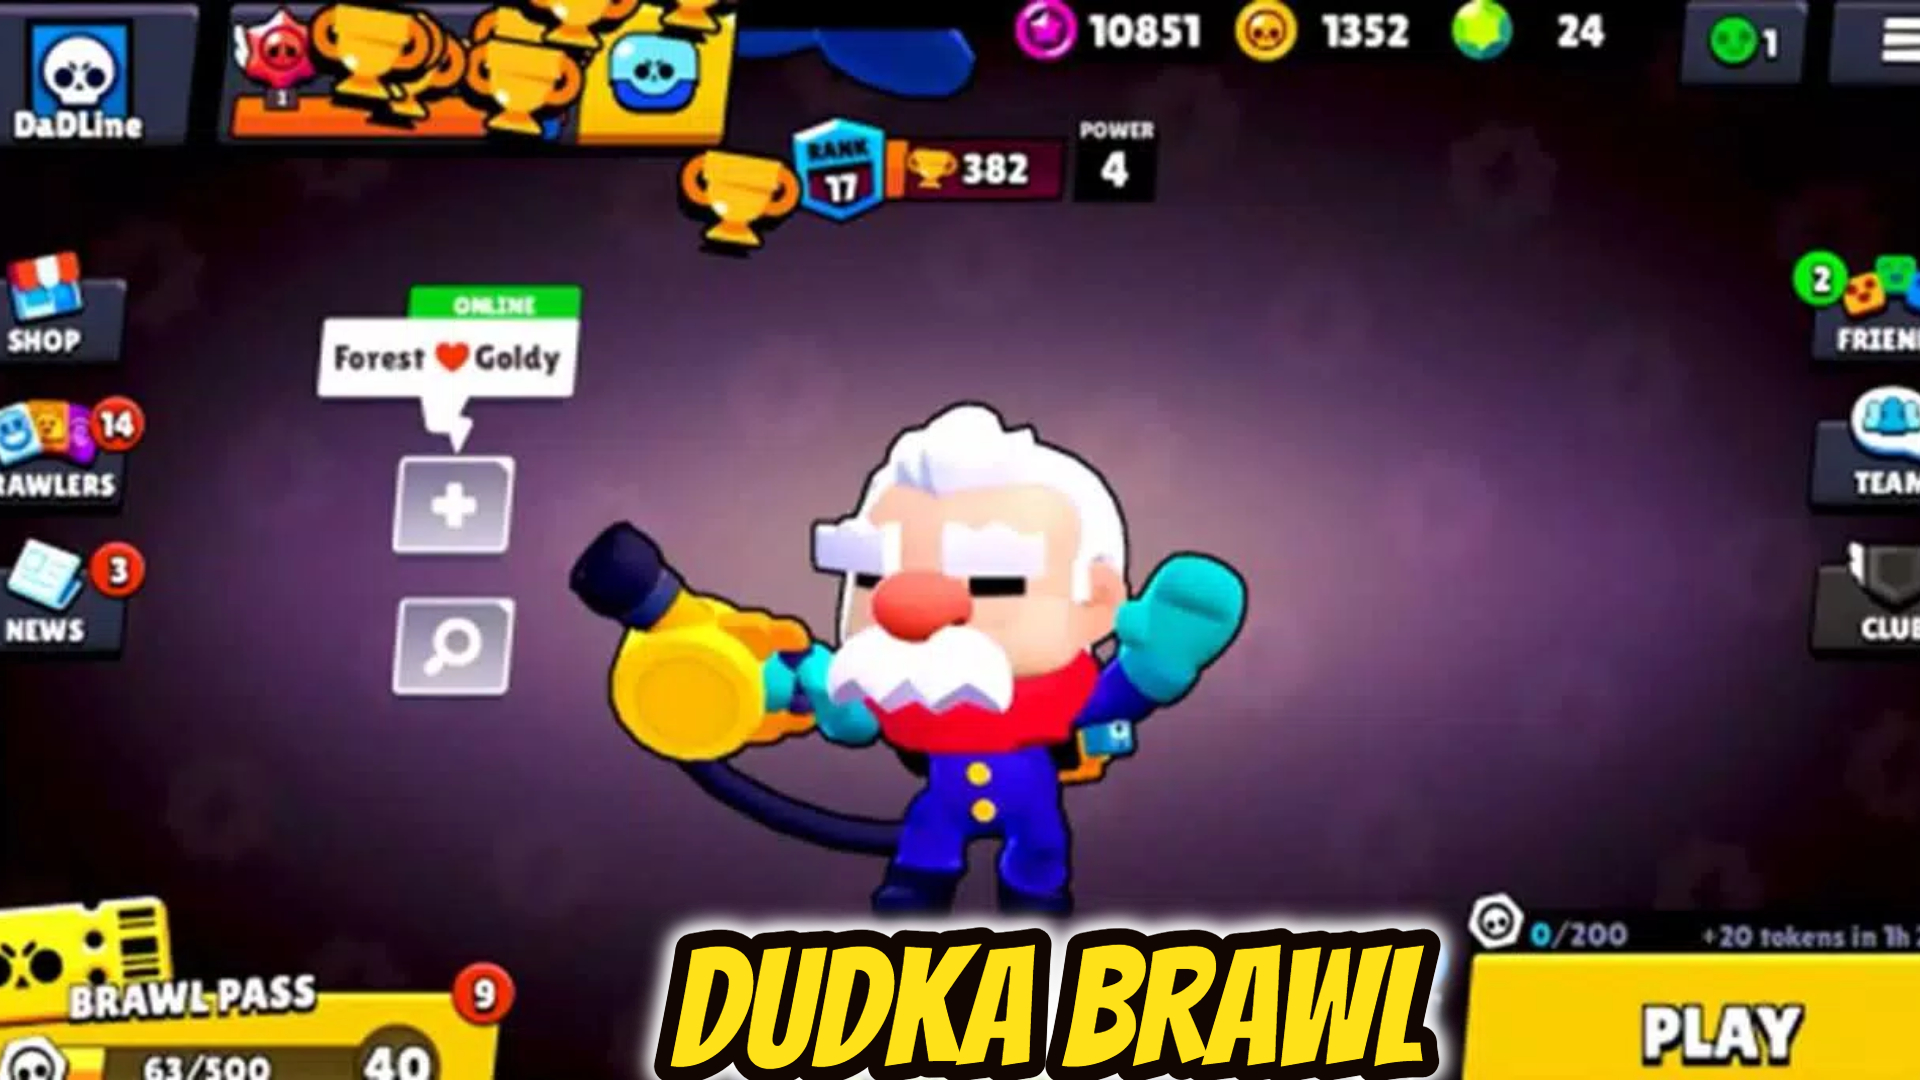 How to Download Dudka Brawl Latest Version on Android